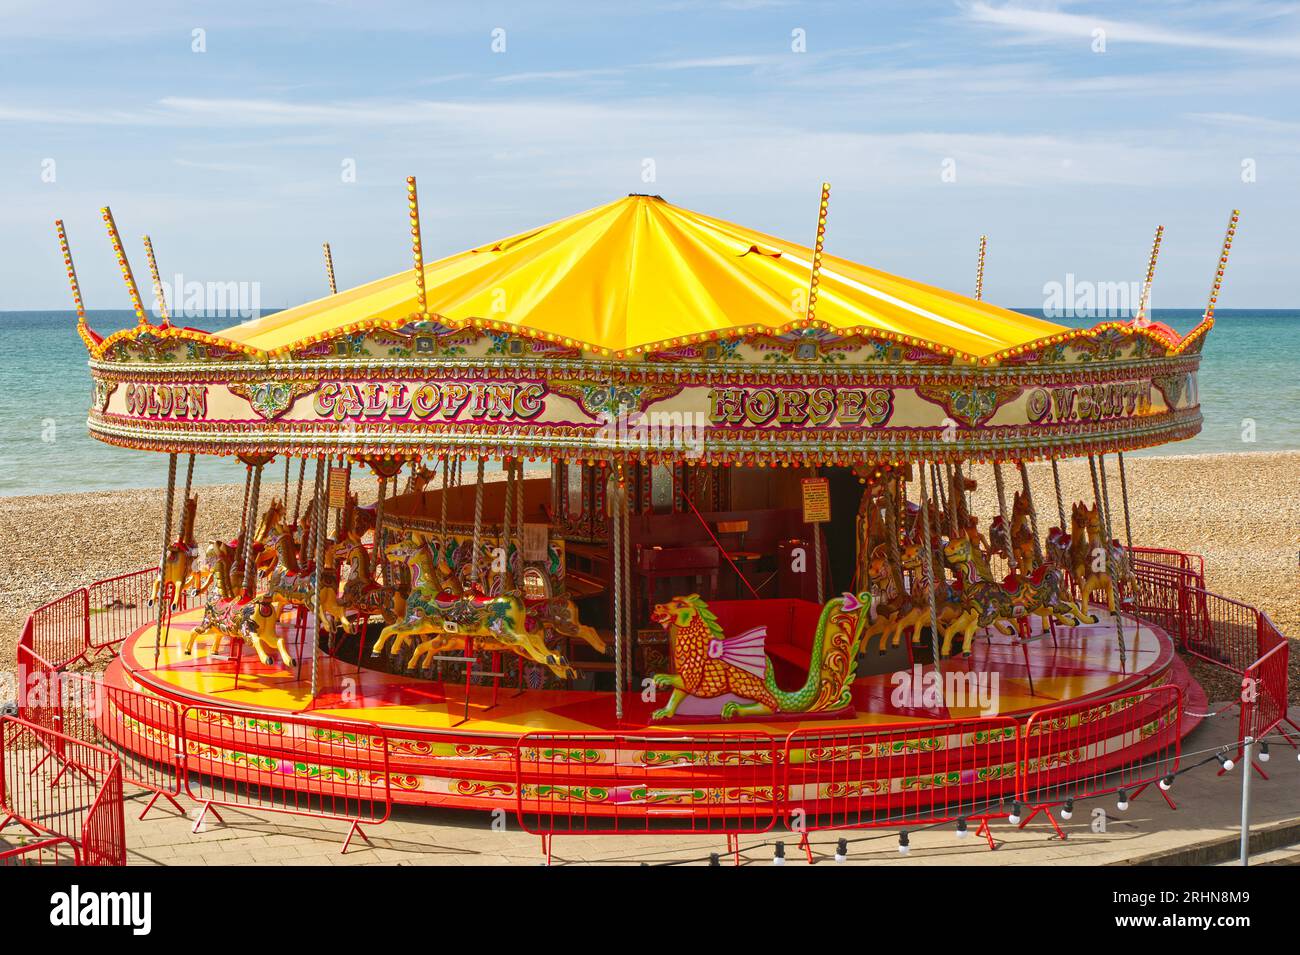 Traditional fairground roundabout on the beach at Brighton in East Sussex, England. No people. Stock Photo